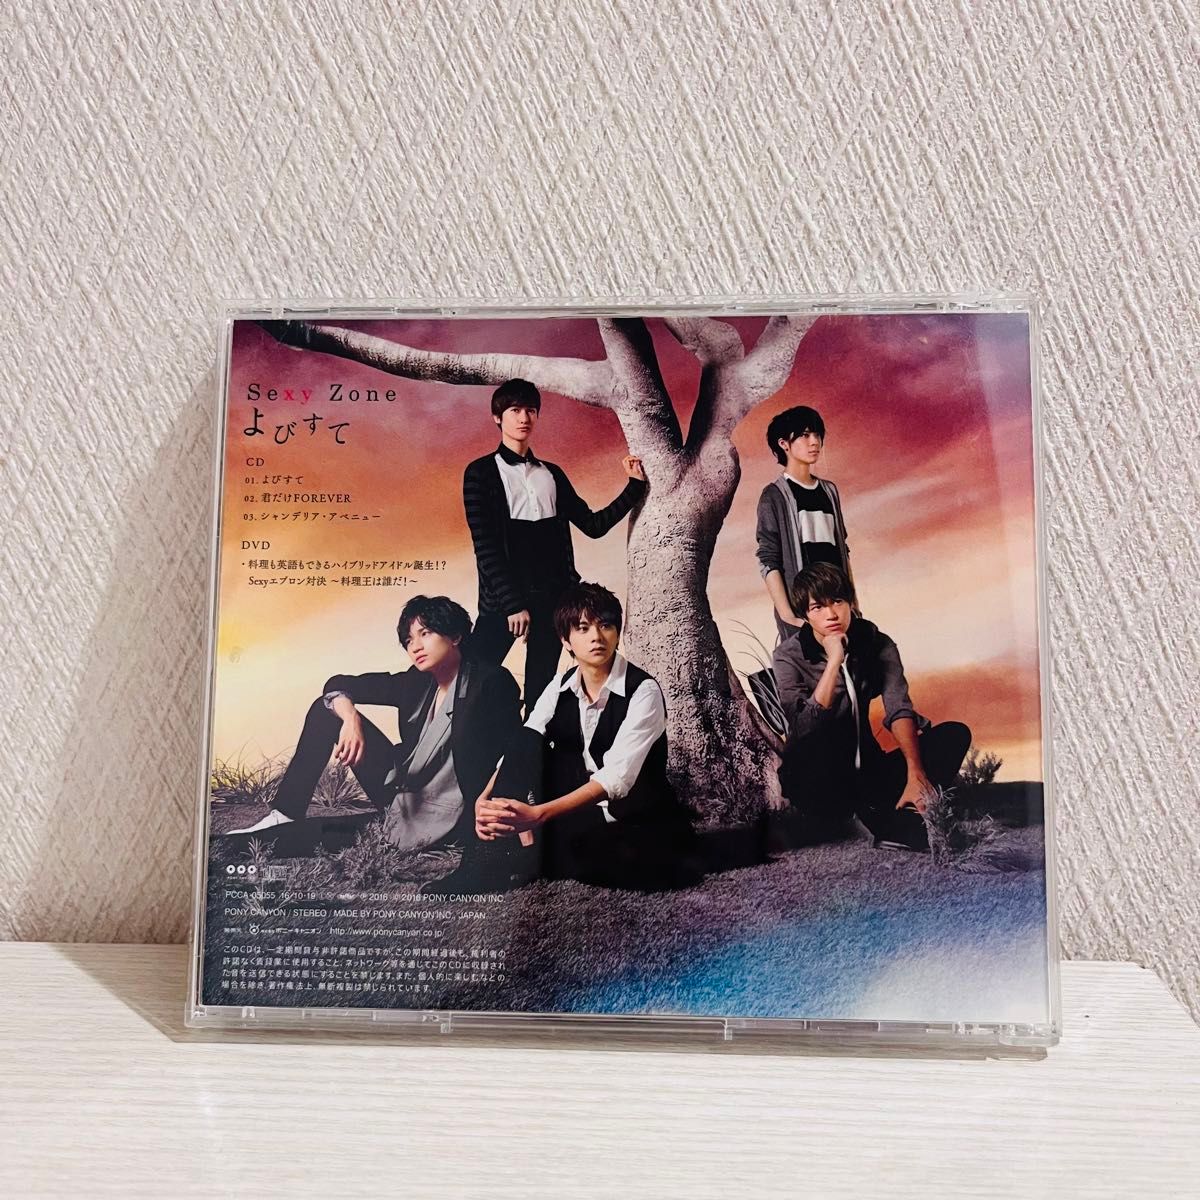 【SexyZone】#初期フルメンバー CD・DVD 3点セット